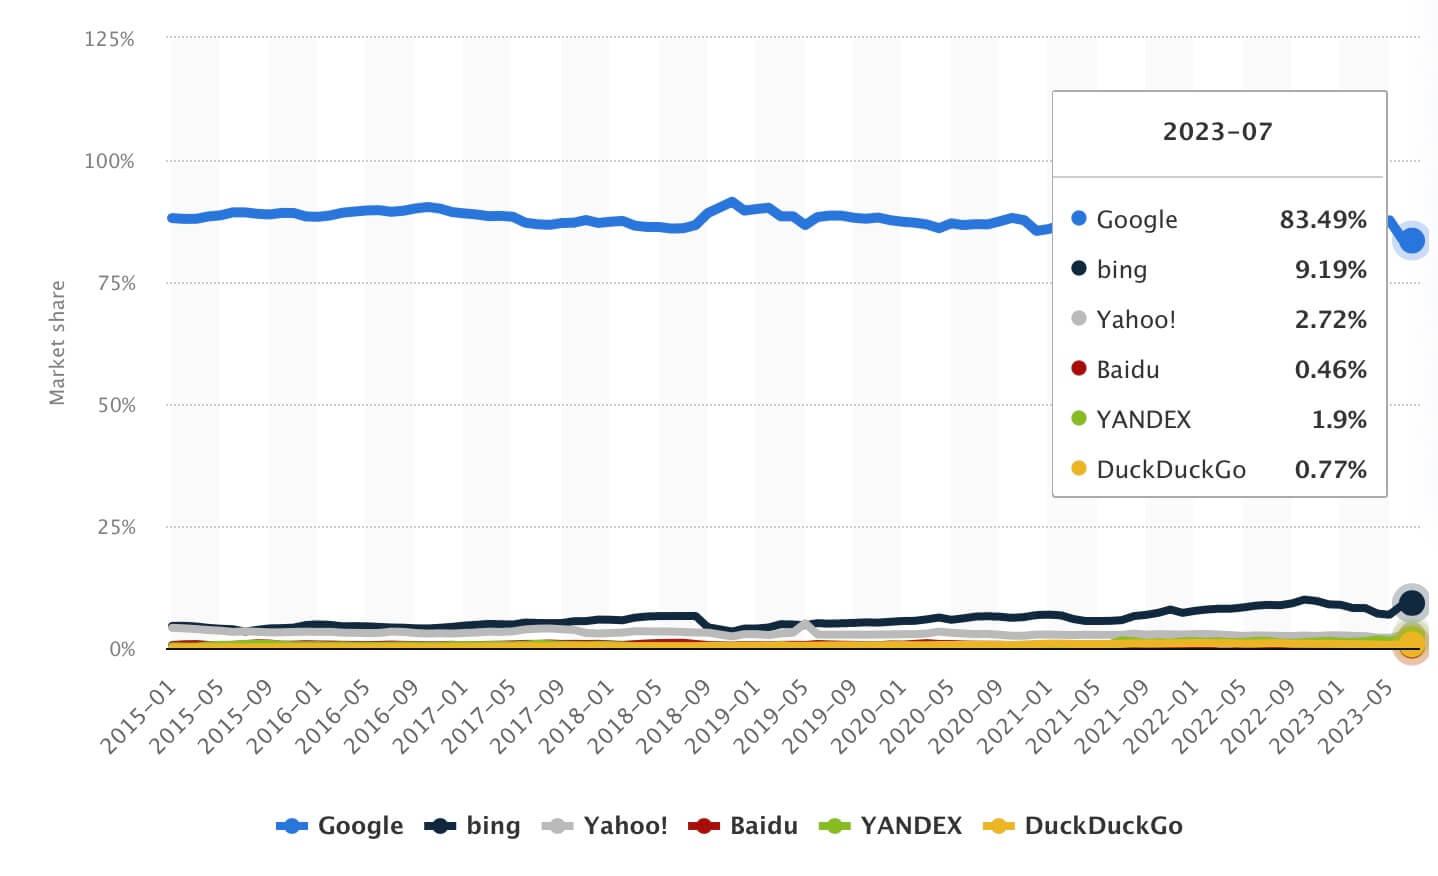 Market share of 5 most popular search engines 2015-2023